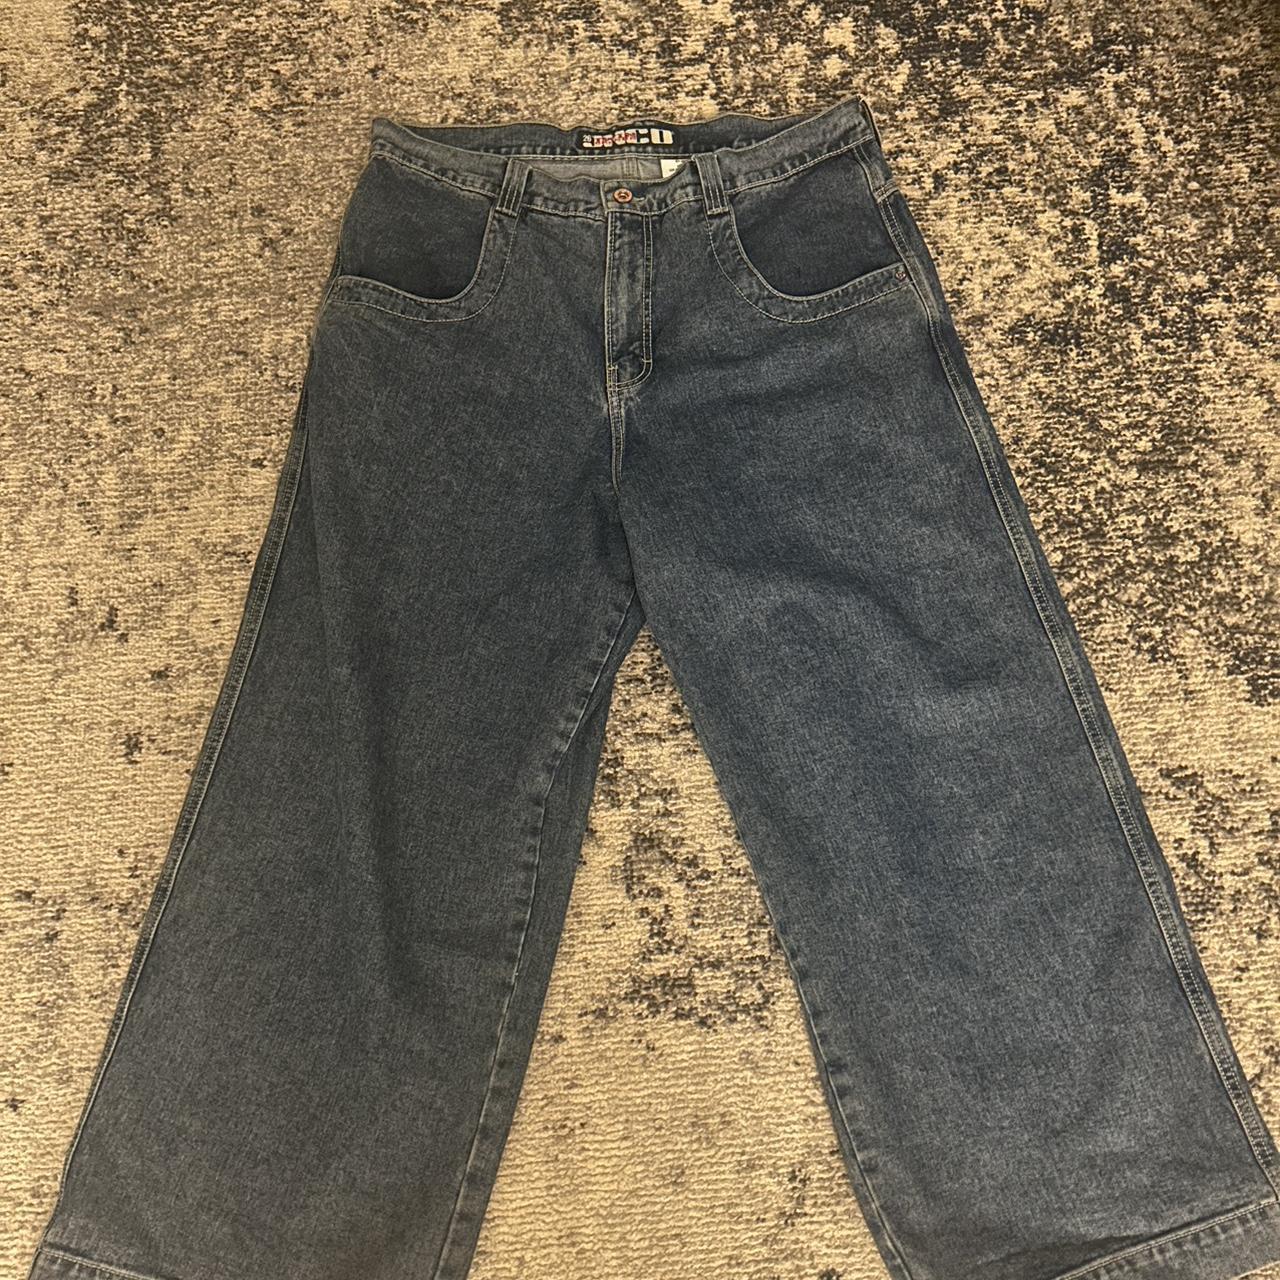 JNCO TWIN CANNONS PRICE IS HIGH BC THEY ARE... - Depop